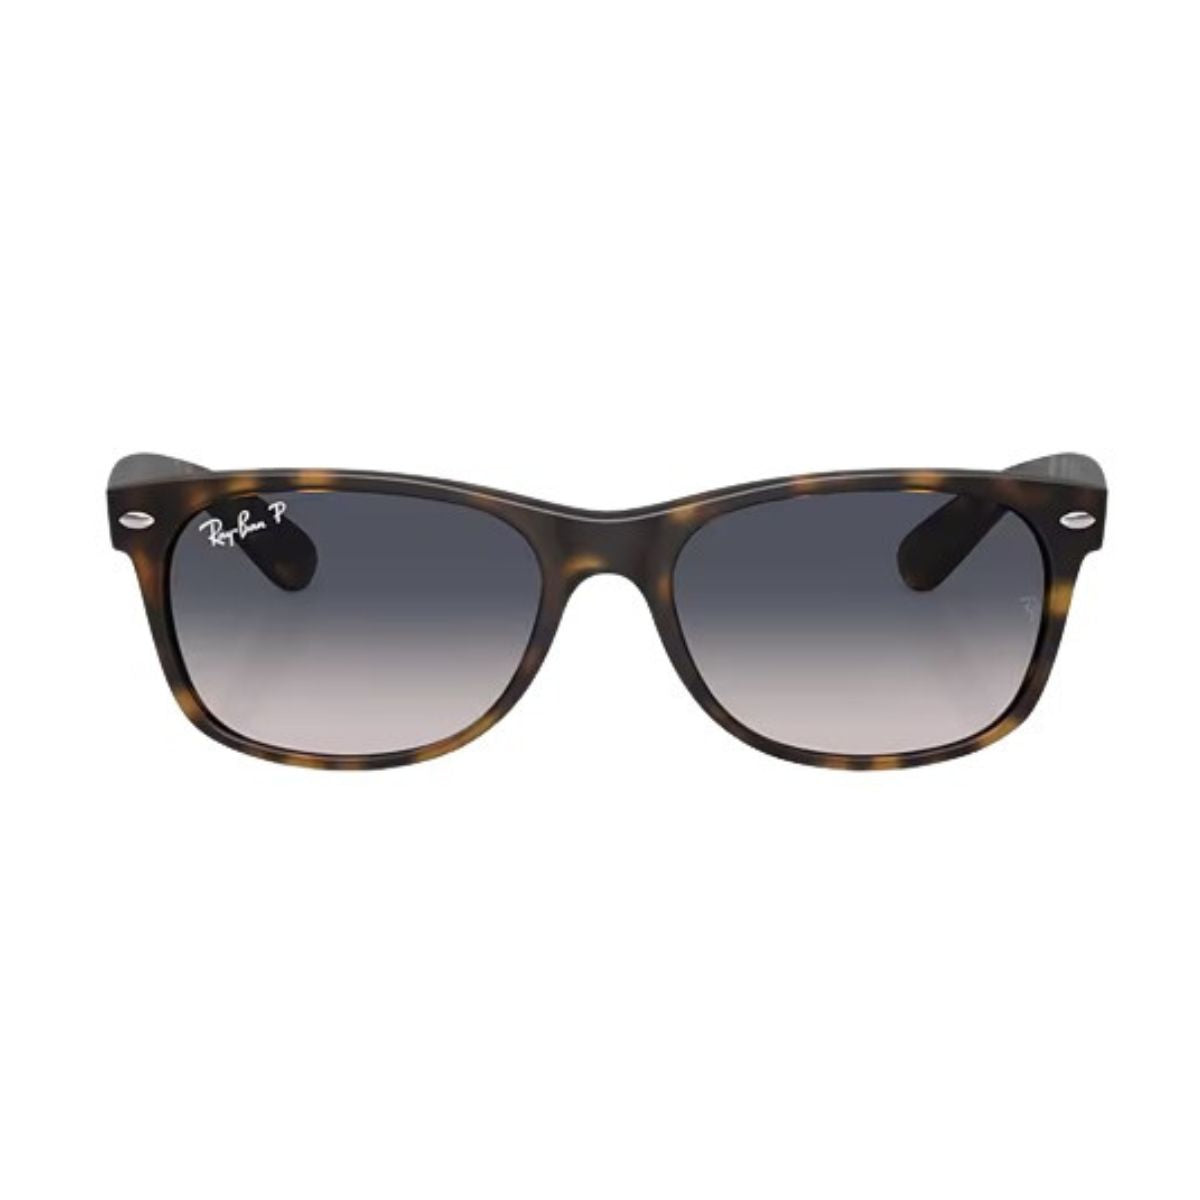 "Buy Ray Ban 2132 865/78 Polarized Sunglass For Men And Women At Optorium"